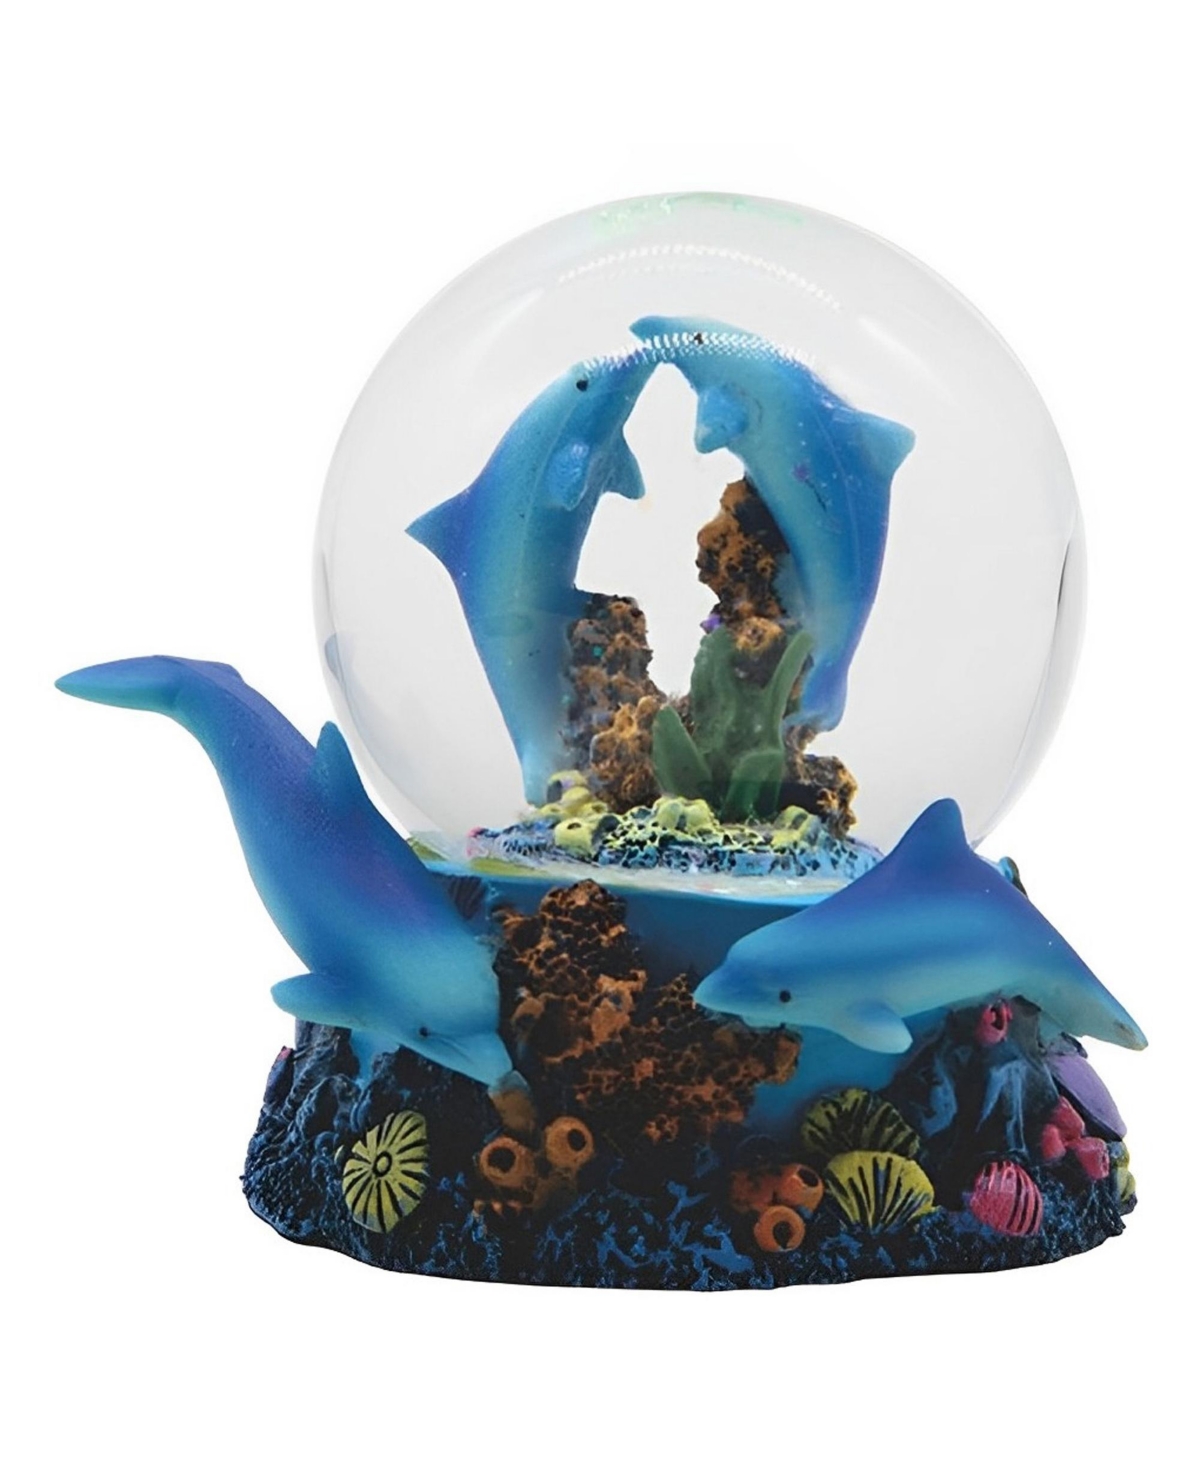 3.5"H Dolphin Glitter Snow Globe Figurine Home Decor Perfect Gift for House Warming, Holidays and Birthdays - Multicolor